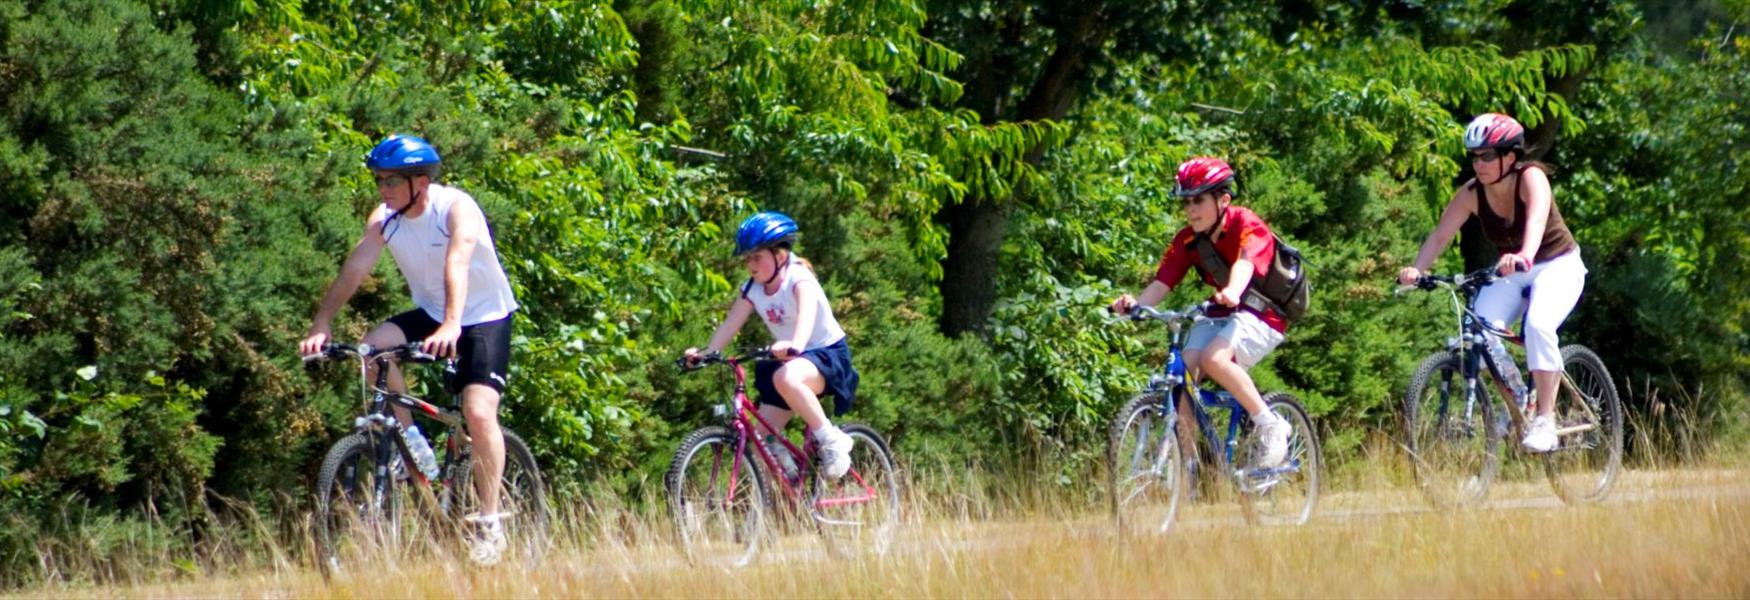 Cycling in Windsor Great Park